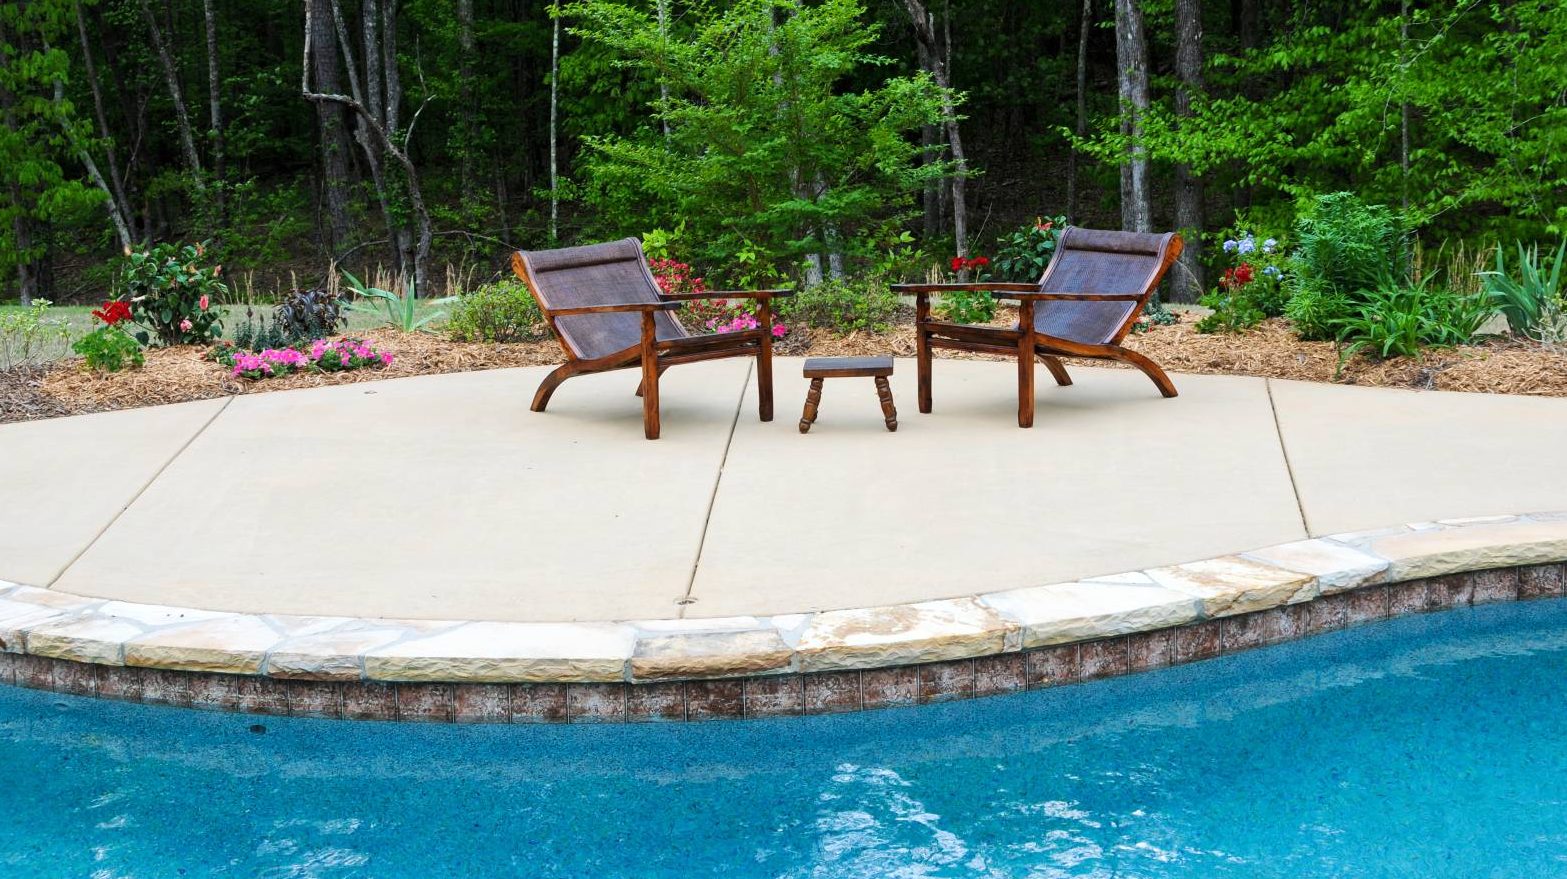 image of pool side patio of concrete